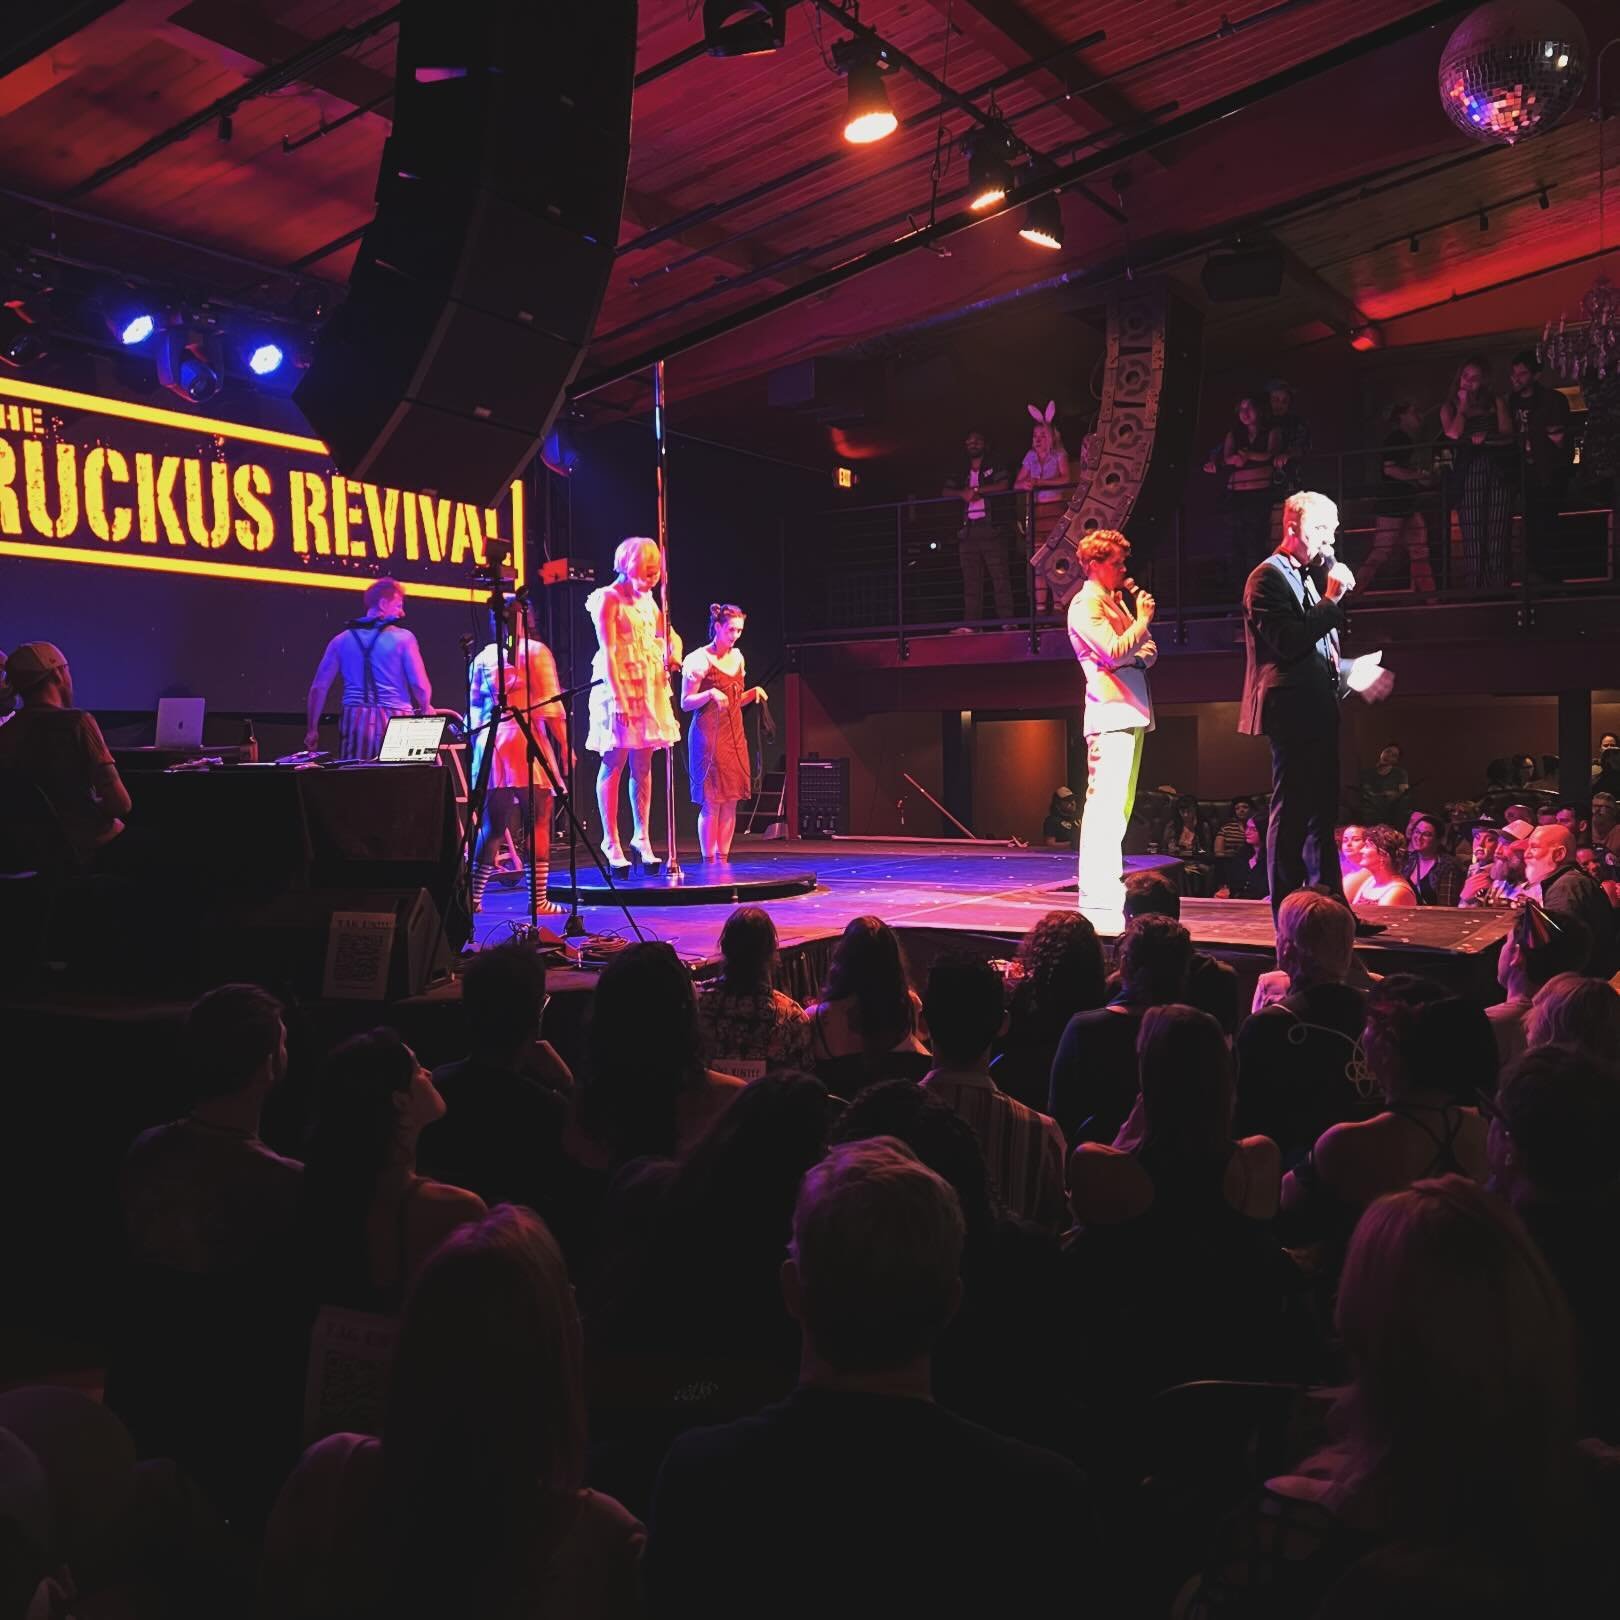 oakland get yourself over to the next @theruckusrevival for something refreshing and wild and ruckus. an oakland institution for sure.